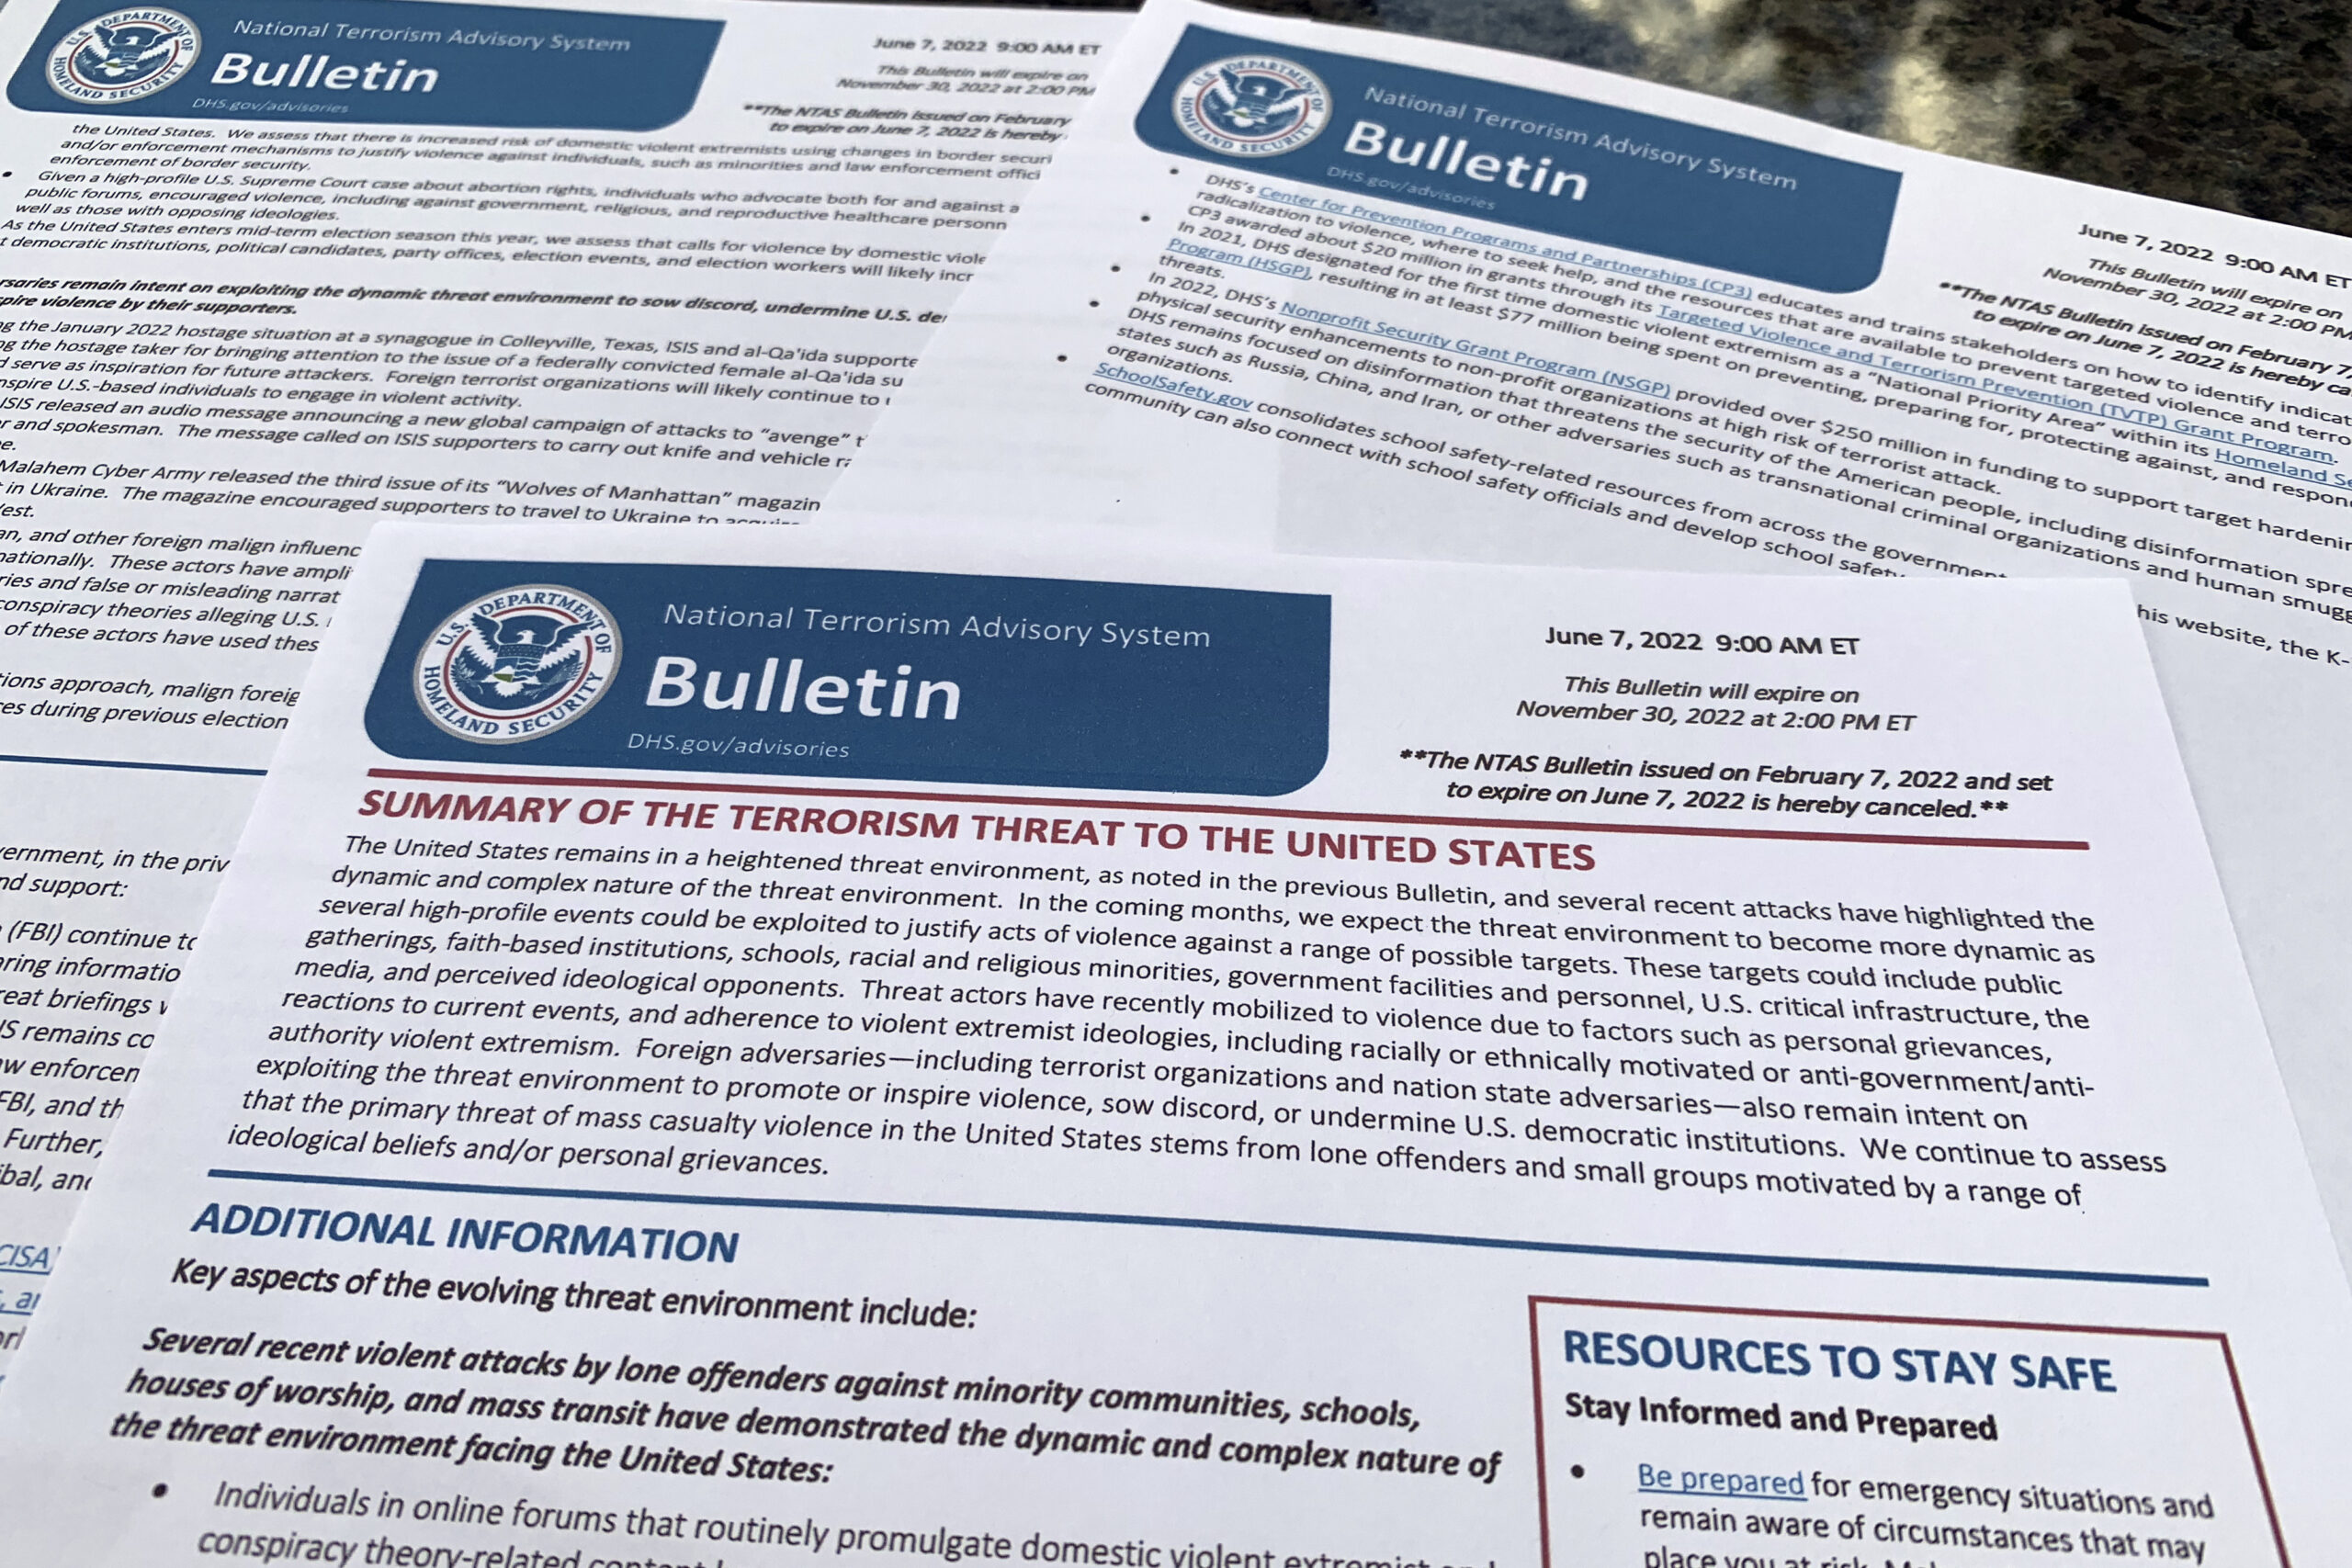 The bulletin issued by the Department of Homeland Security, outlining the current terrorism threat to the United States, is photographed Thursday, June 9, 2022. DHS warned June 7 that skewed framing of the subjects like abortion, guns, immigration and LGTBQ rights, could drive extremists to violently attack pubic places across the U.S. in the coming months. (AP Photo/Jon Elswick)